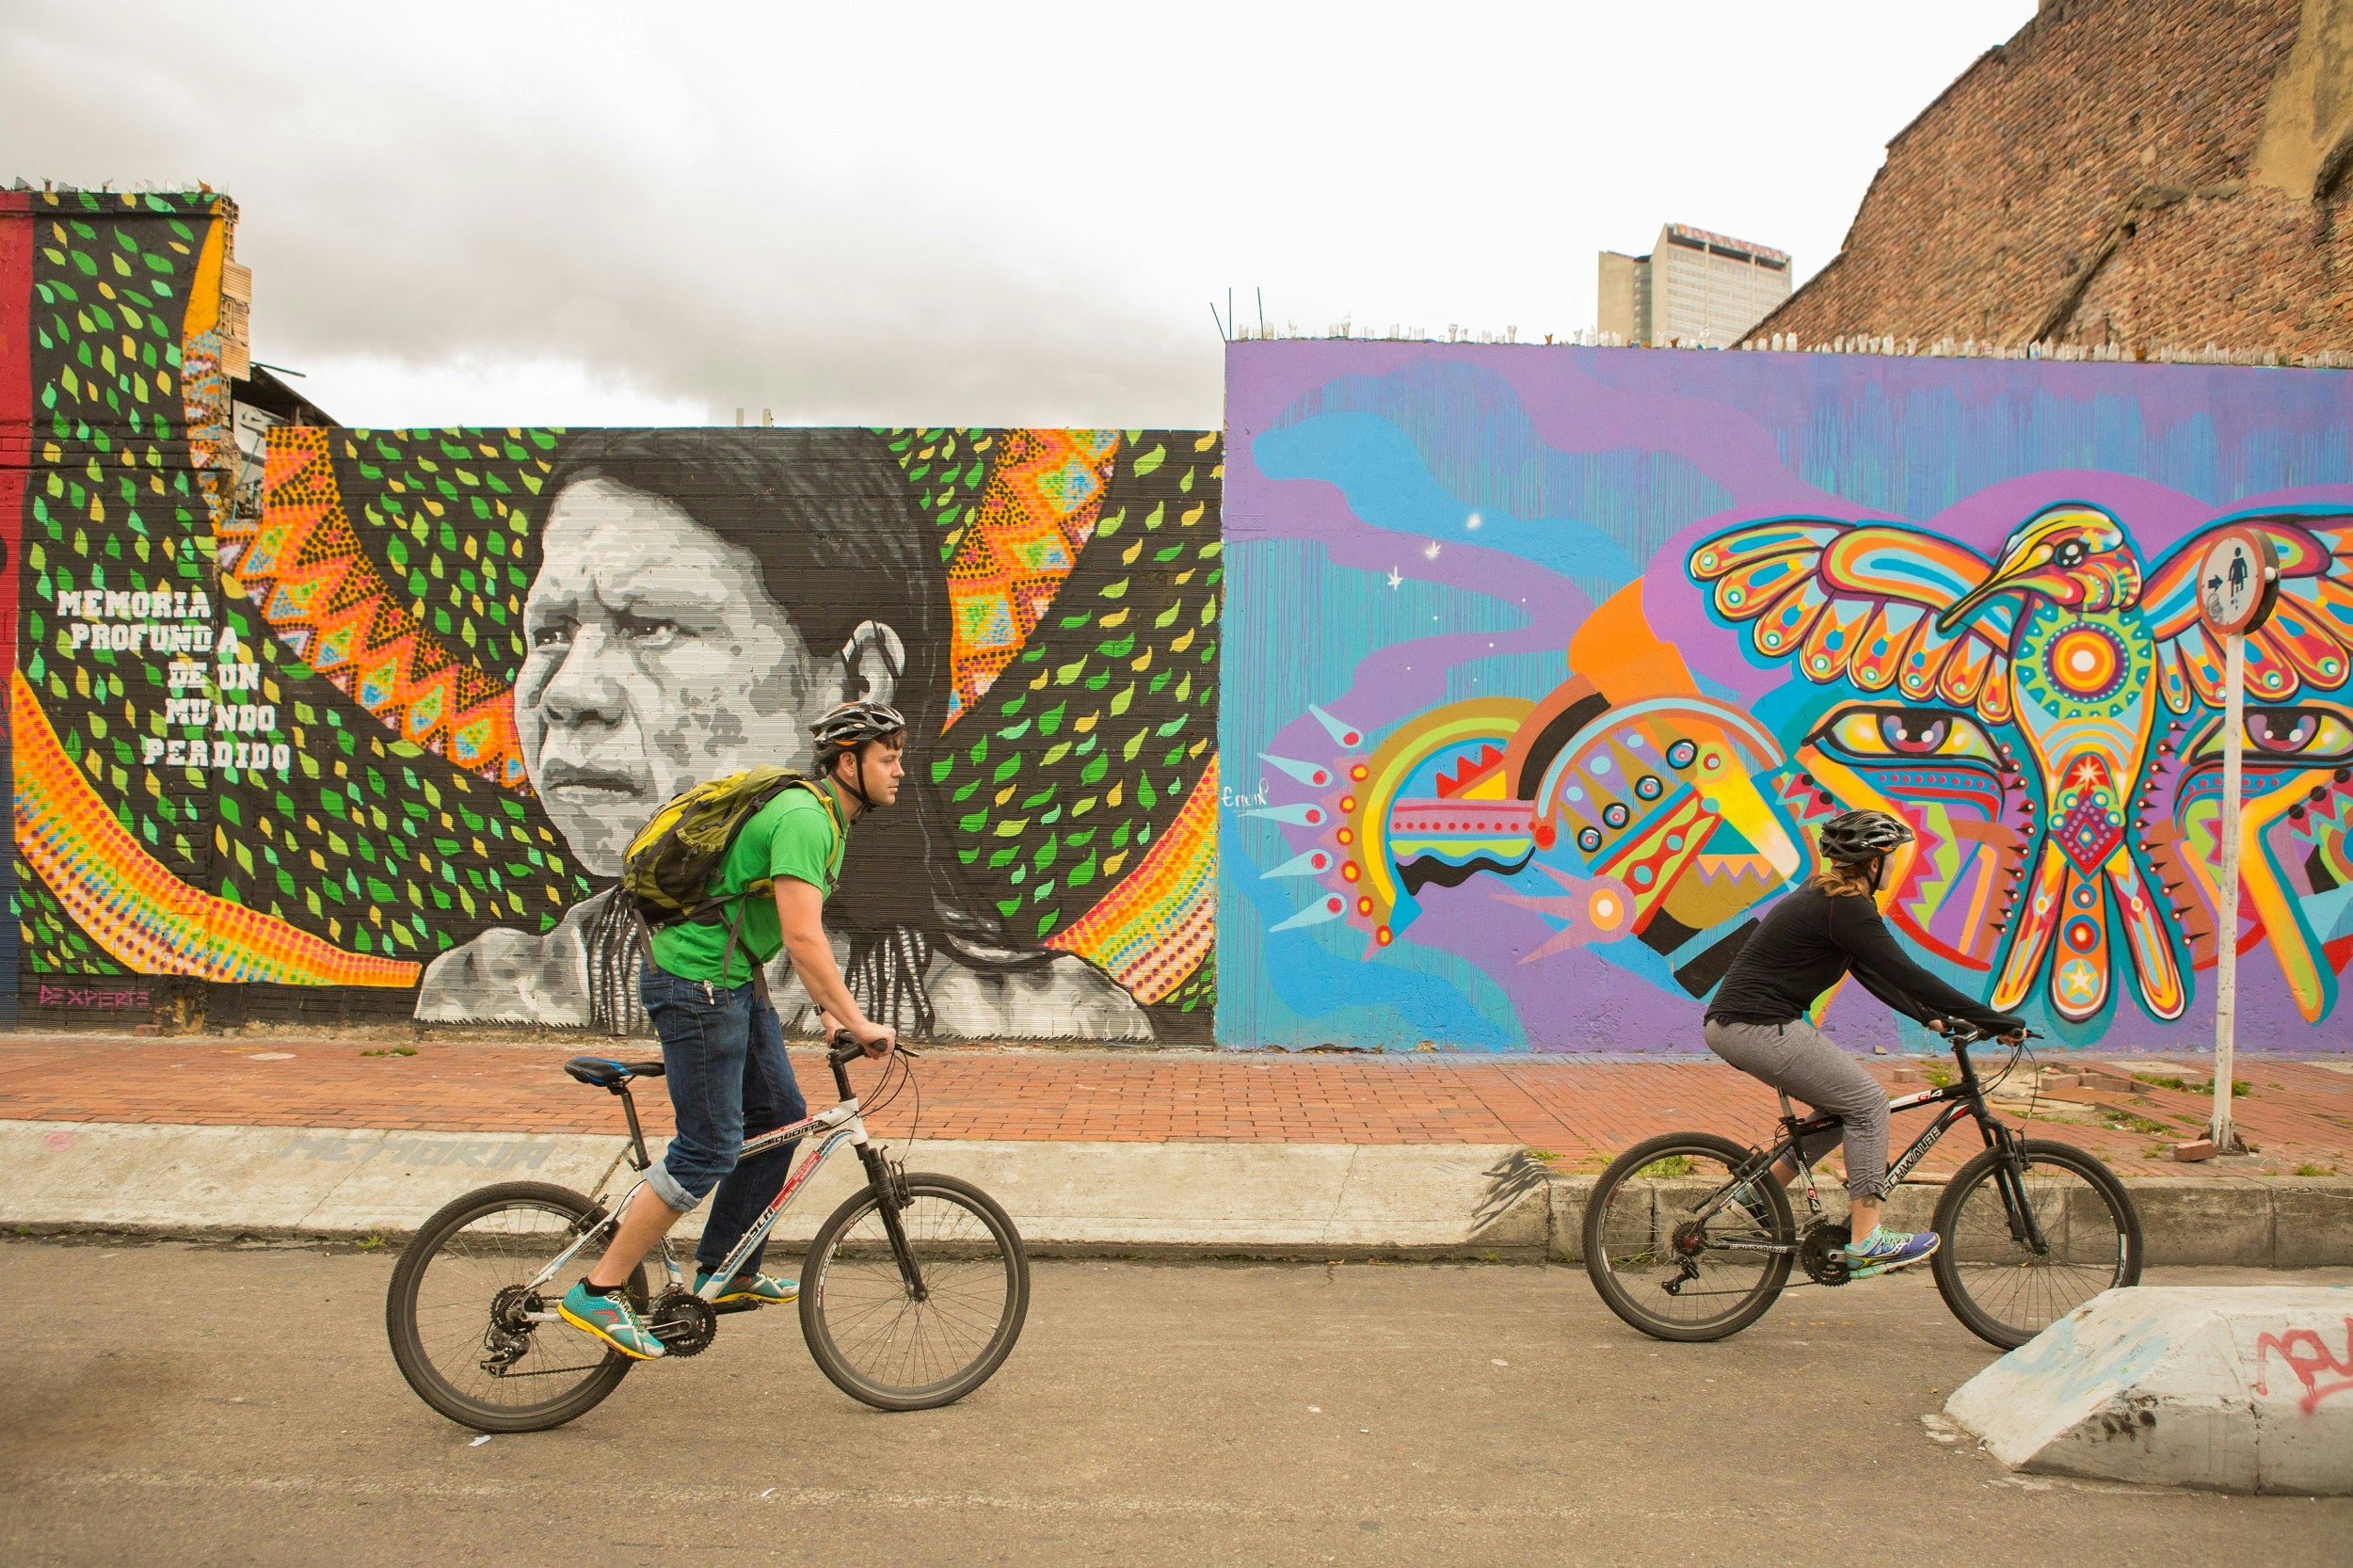 Two cyclists on mountain bikes ride past a long mural that runs the length of a street